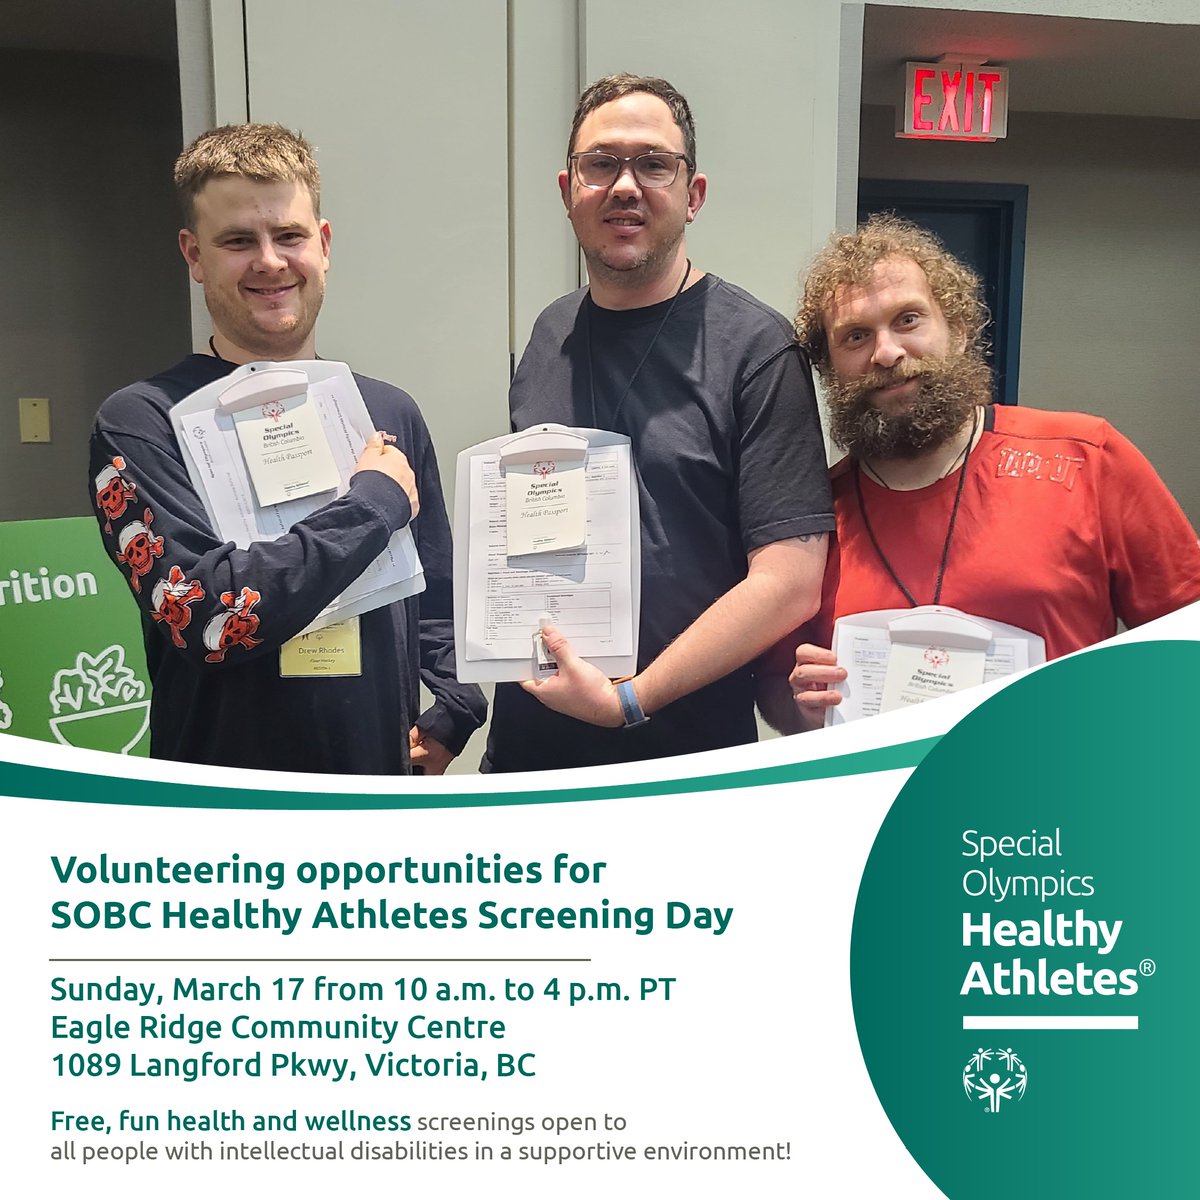 So excited for our Healthy Athletes Screening Day in #VictoriaBC on March 17! 🤩

📋 Help spread the word and register now: specialolympics.ca/british-columb…

#InclusiveHealth #WellnessWednesday #Health #Wellness